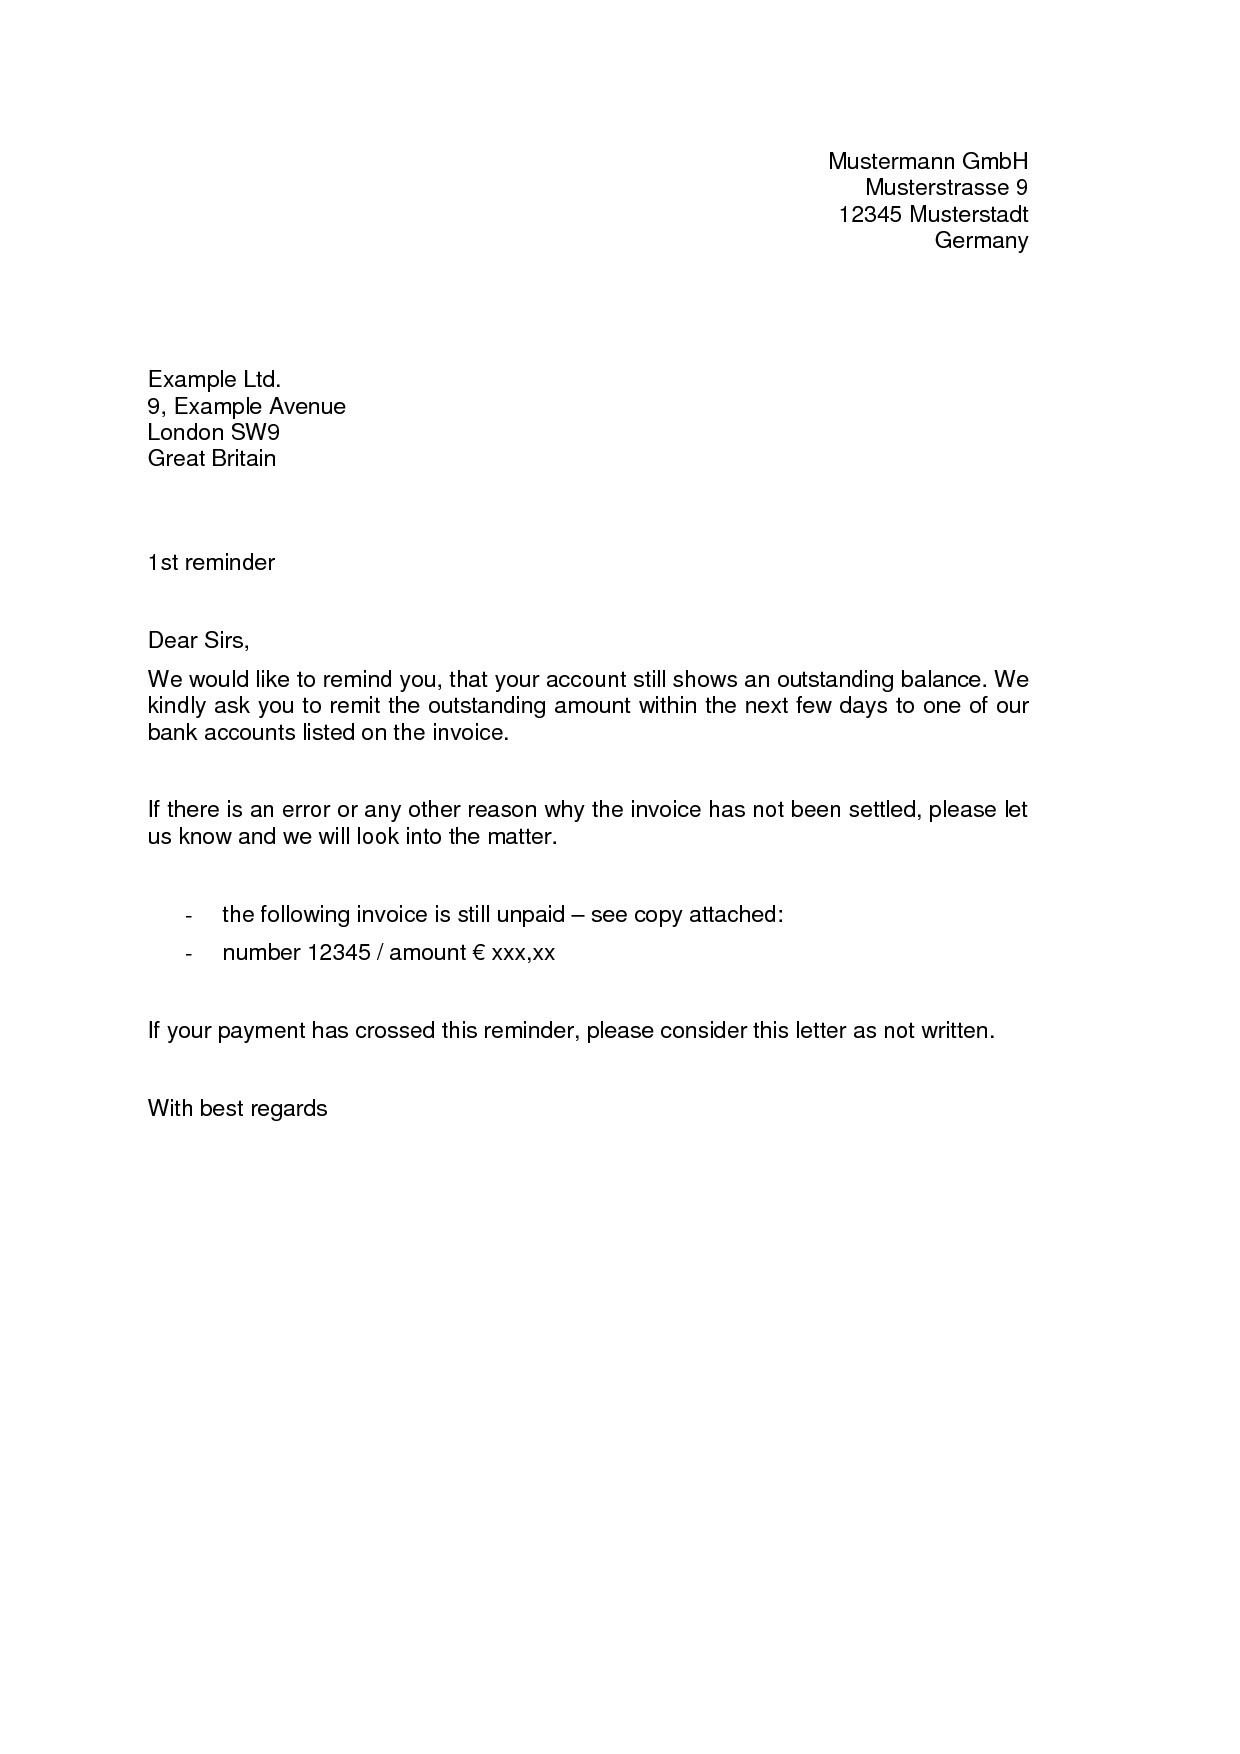 Outstanding Payment Letter Template - Letter Writing format for Outstanding Payment Hollywoodcinema